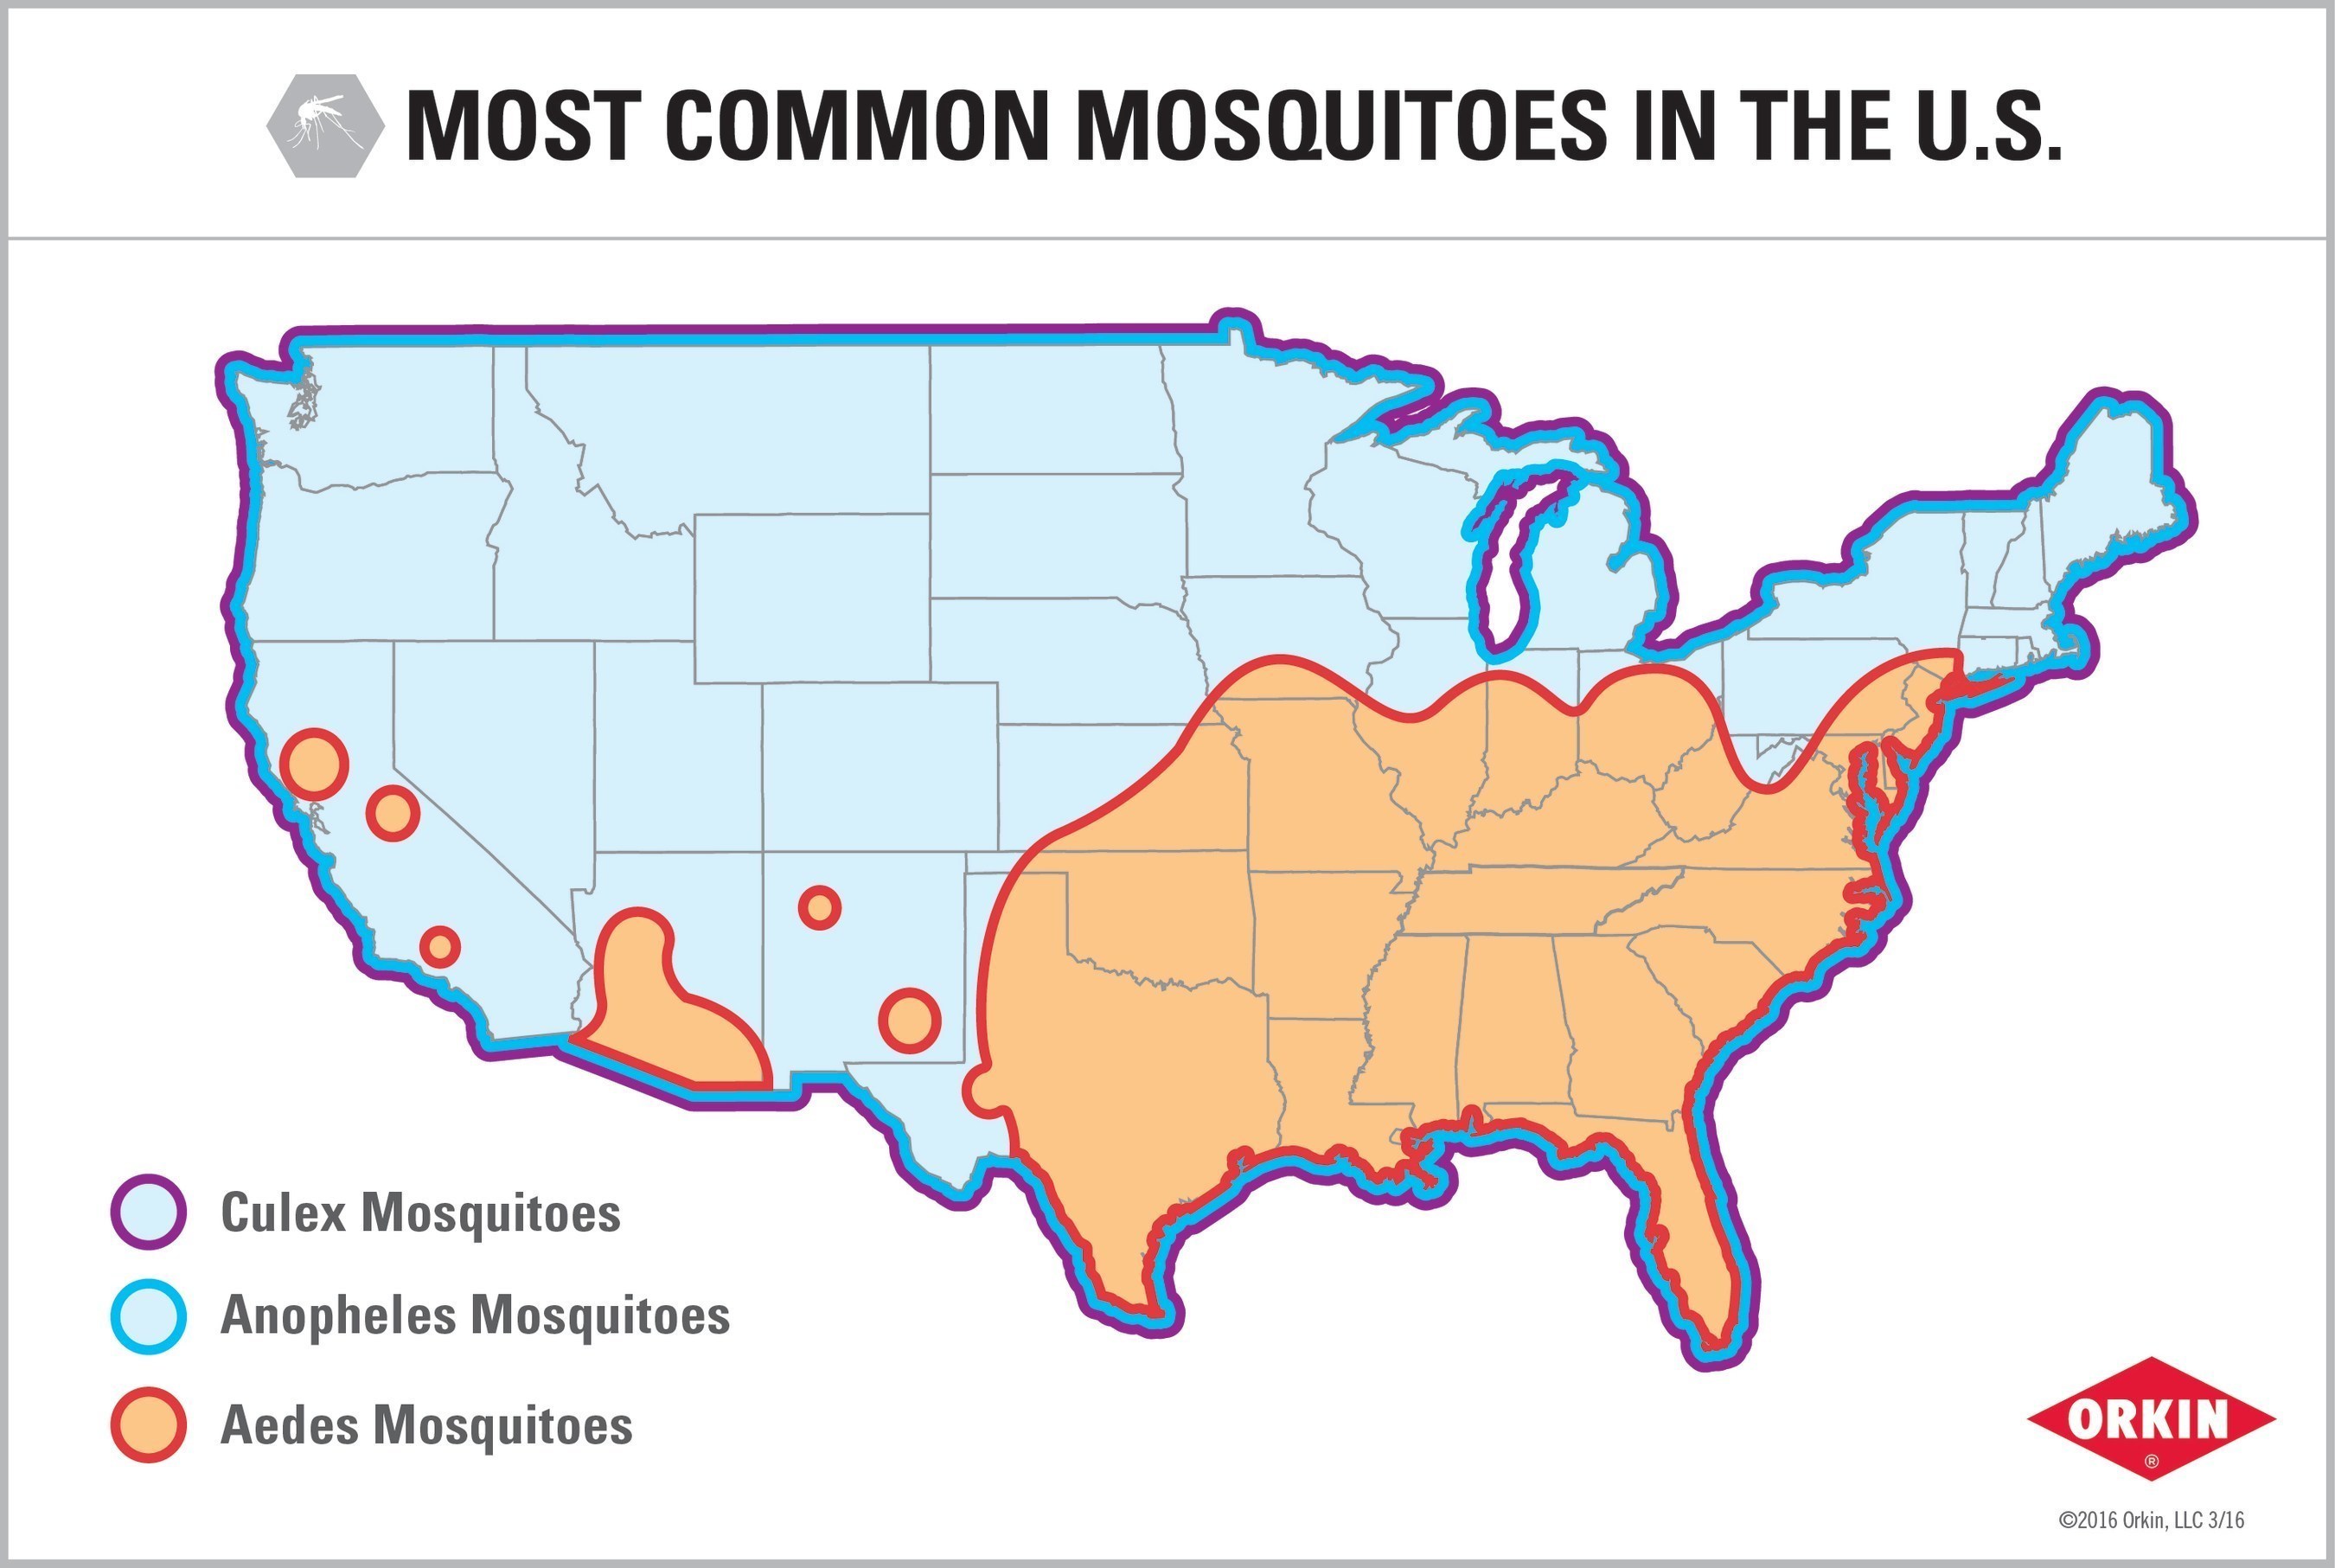 Mosquitoes are known carriers of several diseases, including Zika virus, Chikungunya virus and West Nile virus, so people across the United States - whether their city is on the list or not - need to take precaution to help prevent mosquito bites.